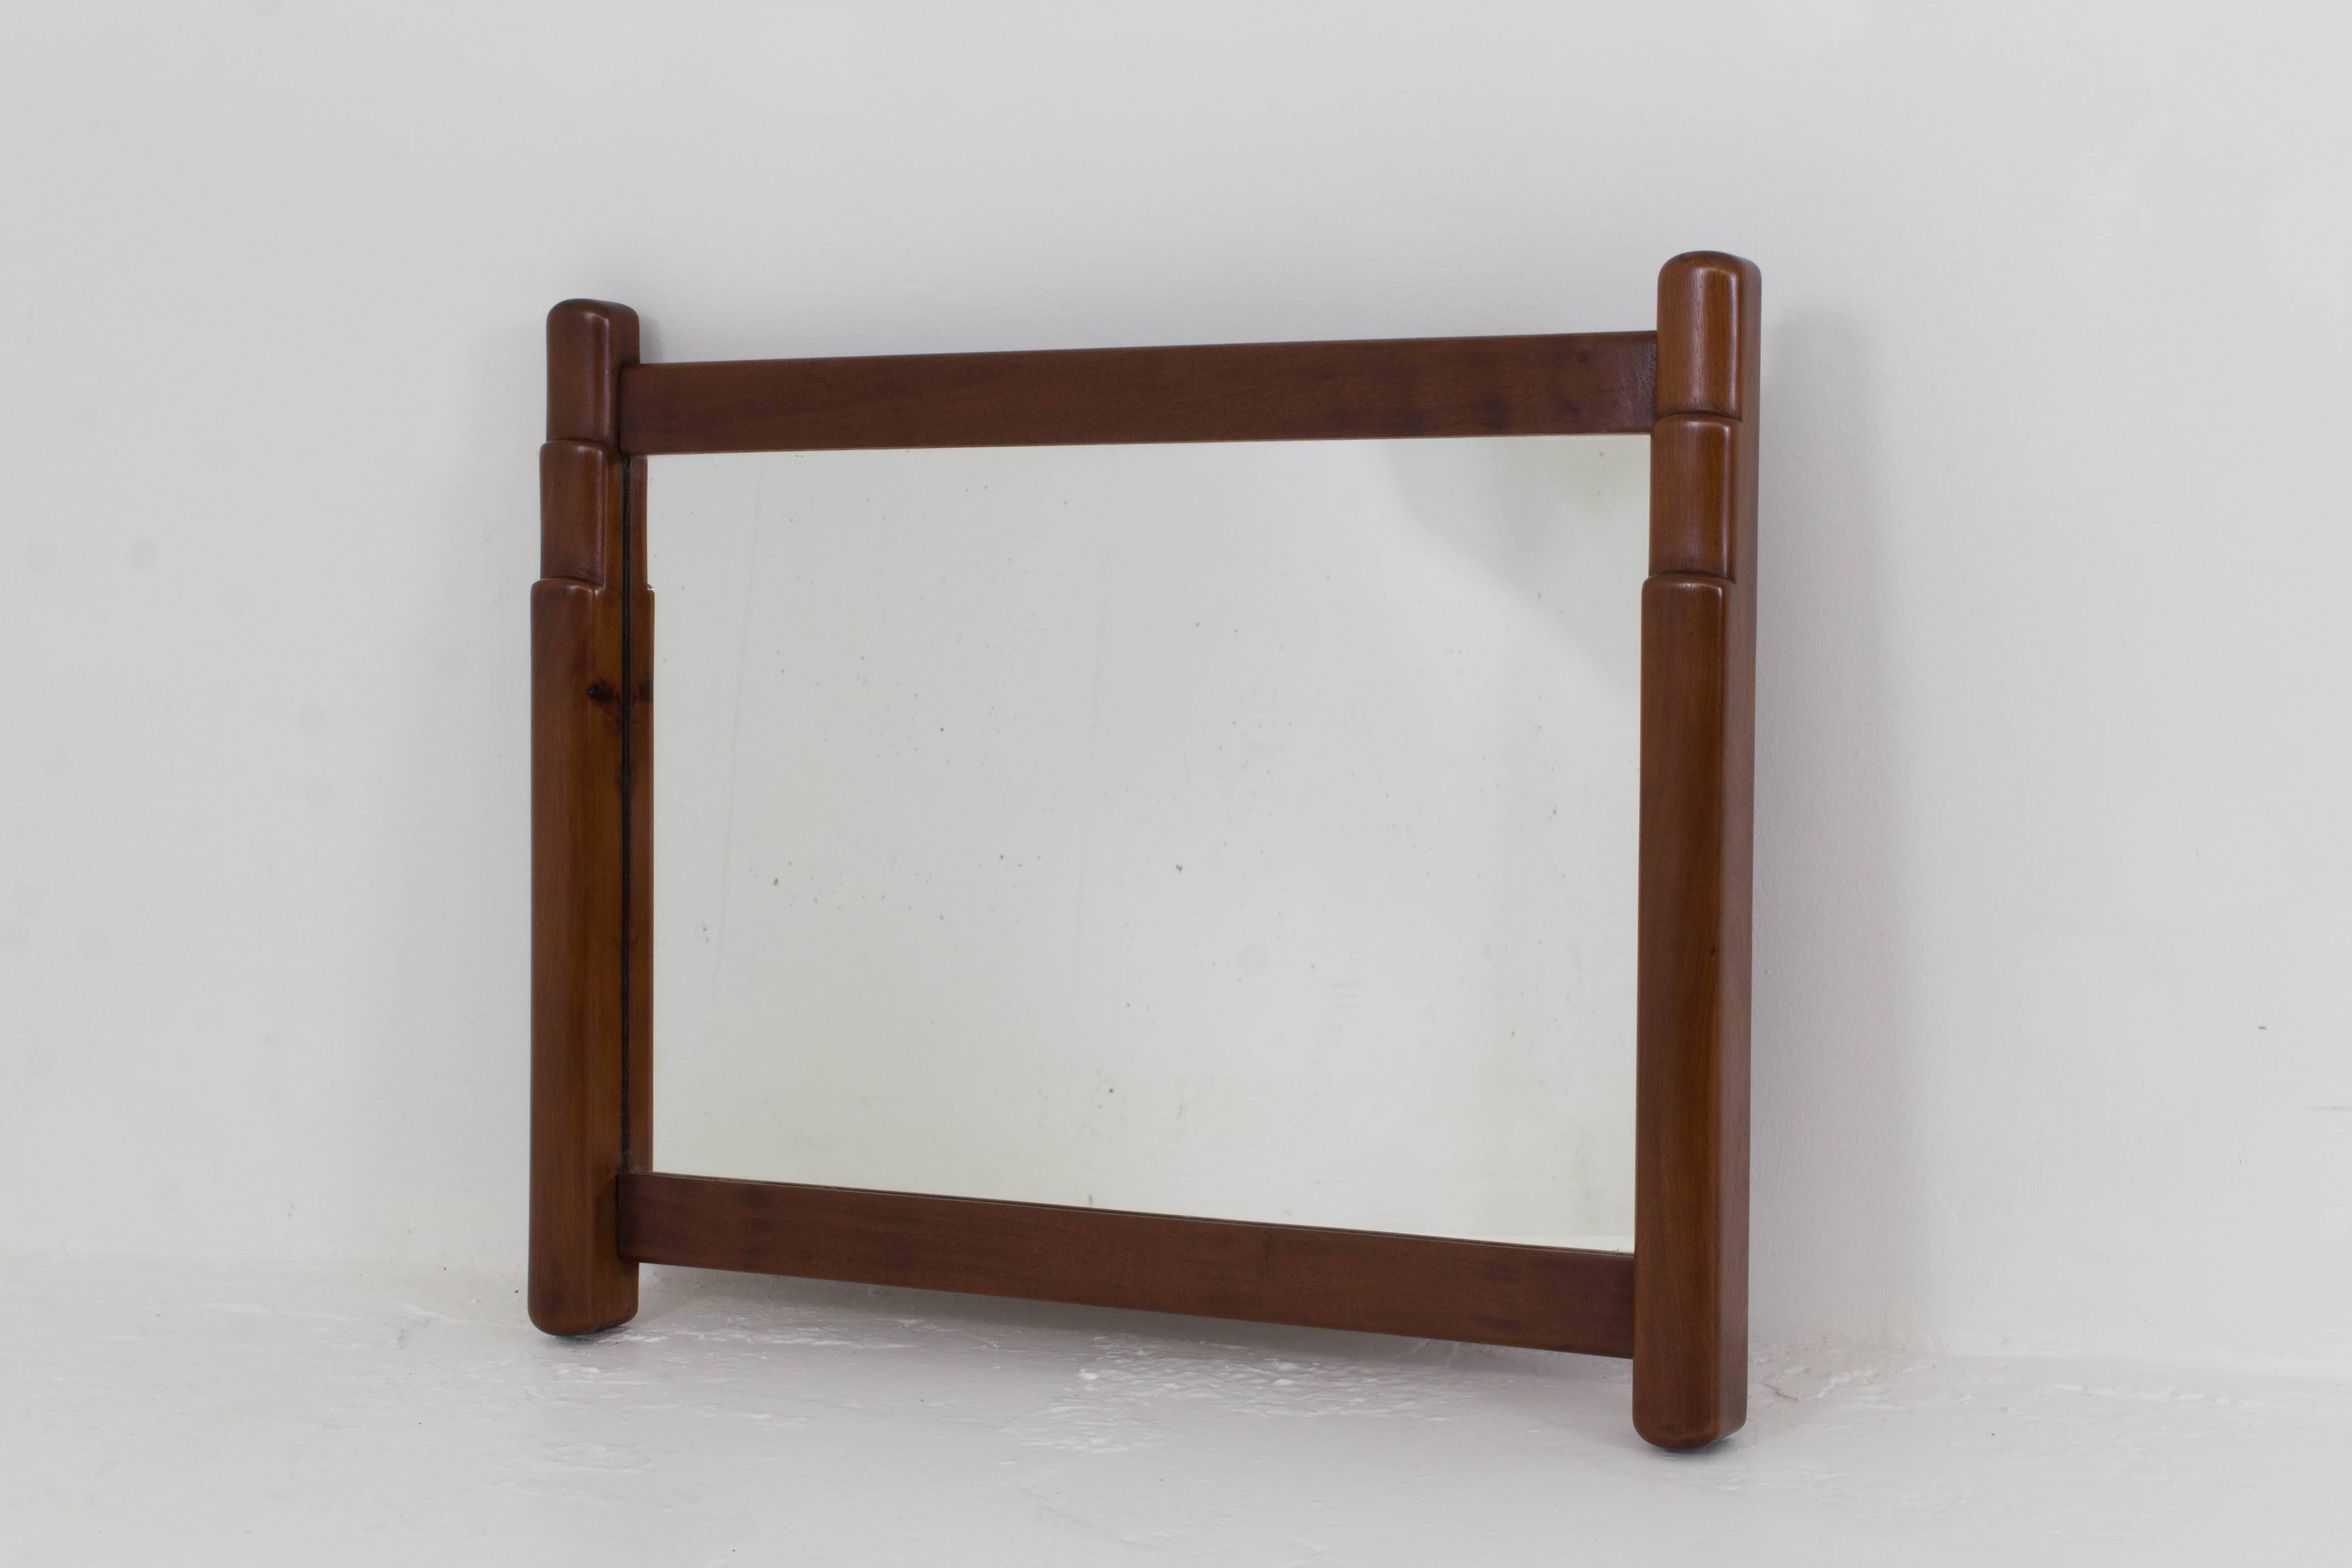 Pair of Art Deco Amsterdam School mirrors by Paul Bromberg for Metz & Co.
Solid mahogany frame 1920s.
In good original condition with minor wear consistent with age and use,
preserving a beautiful patina.